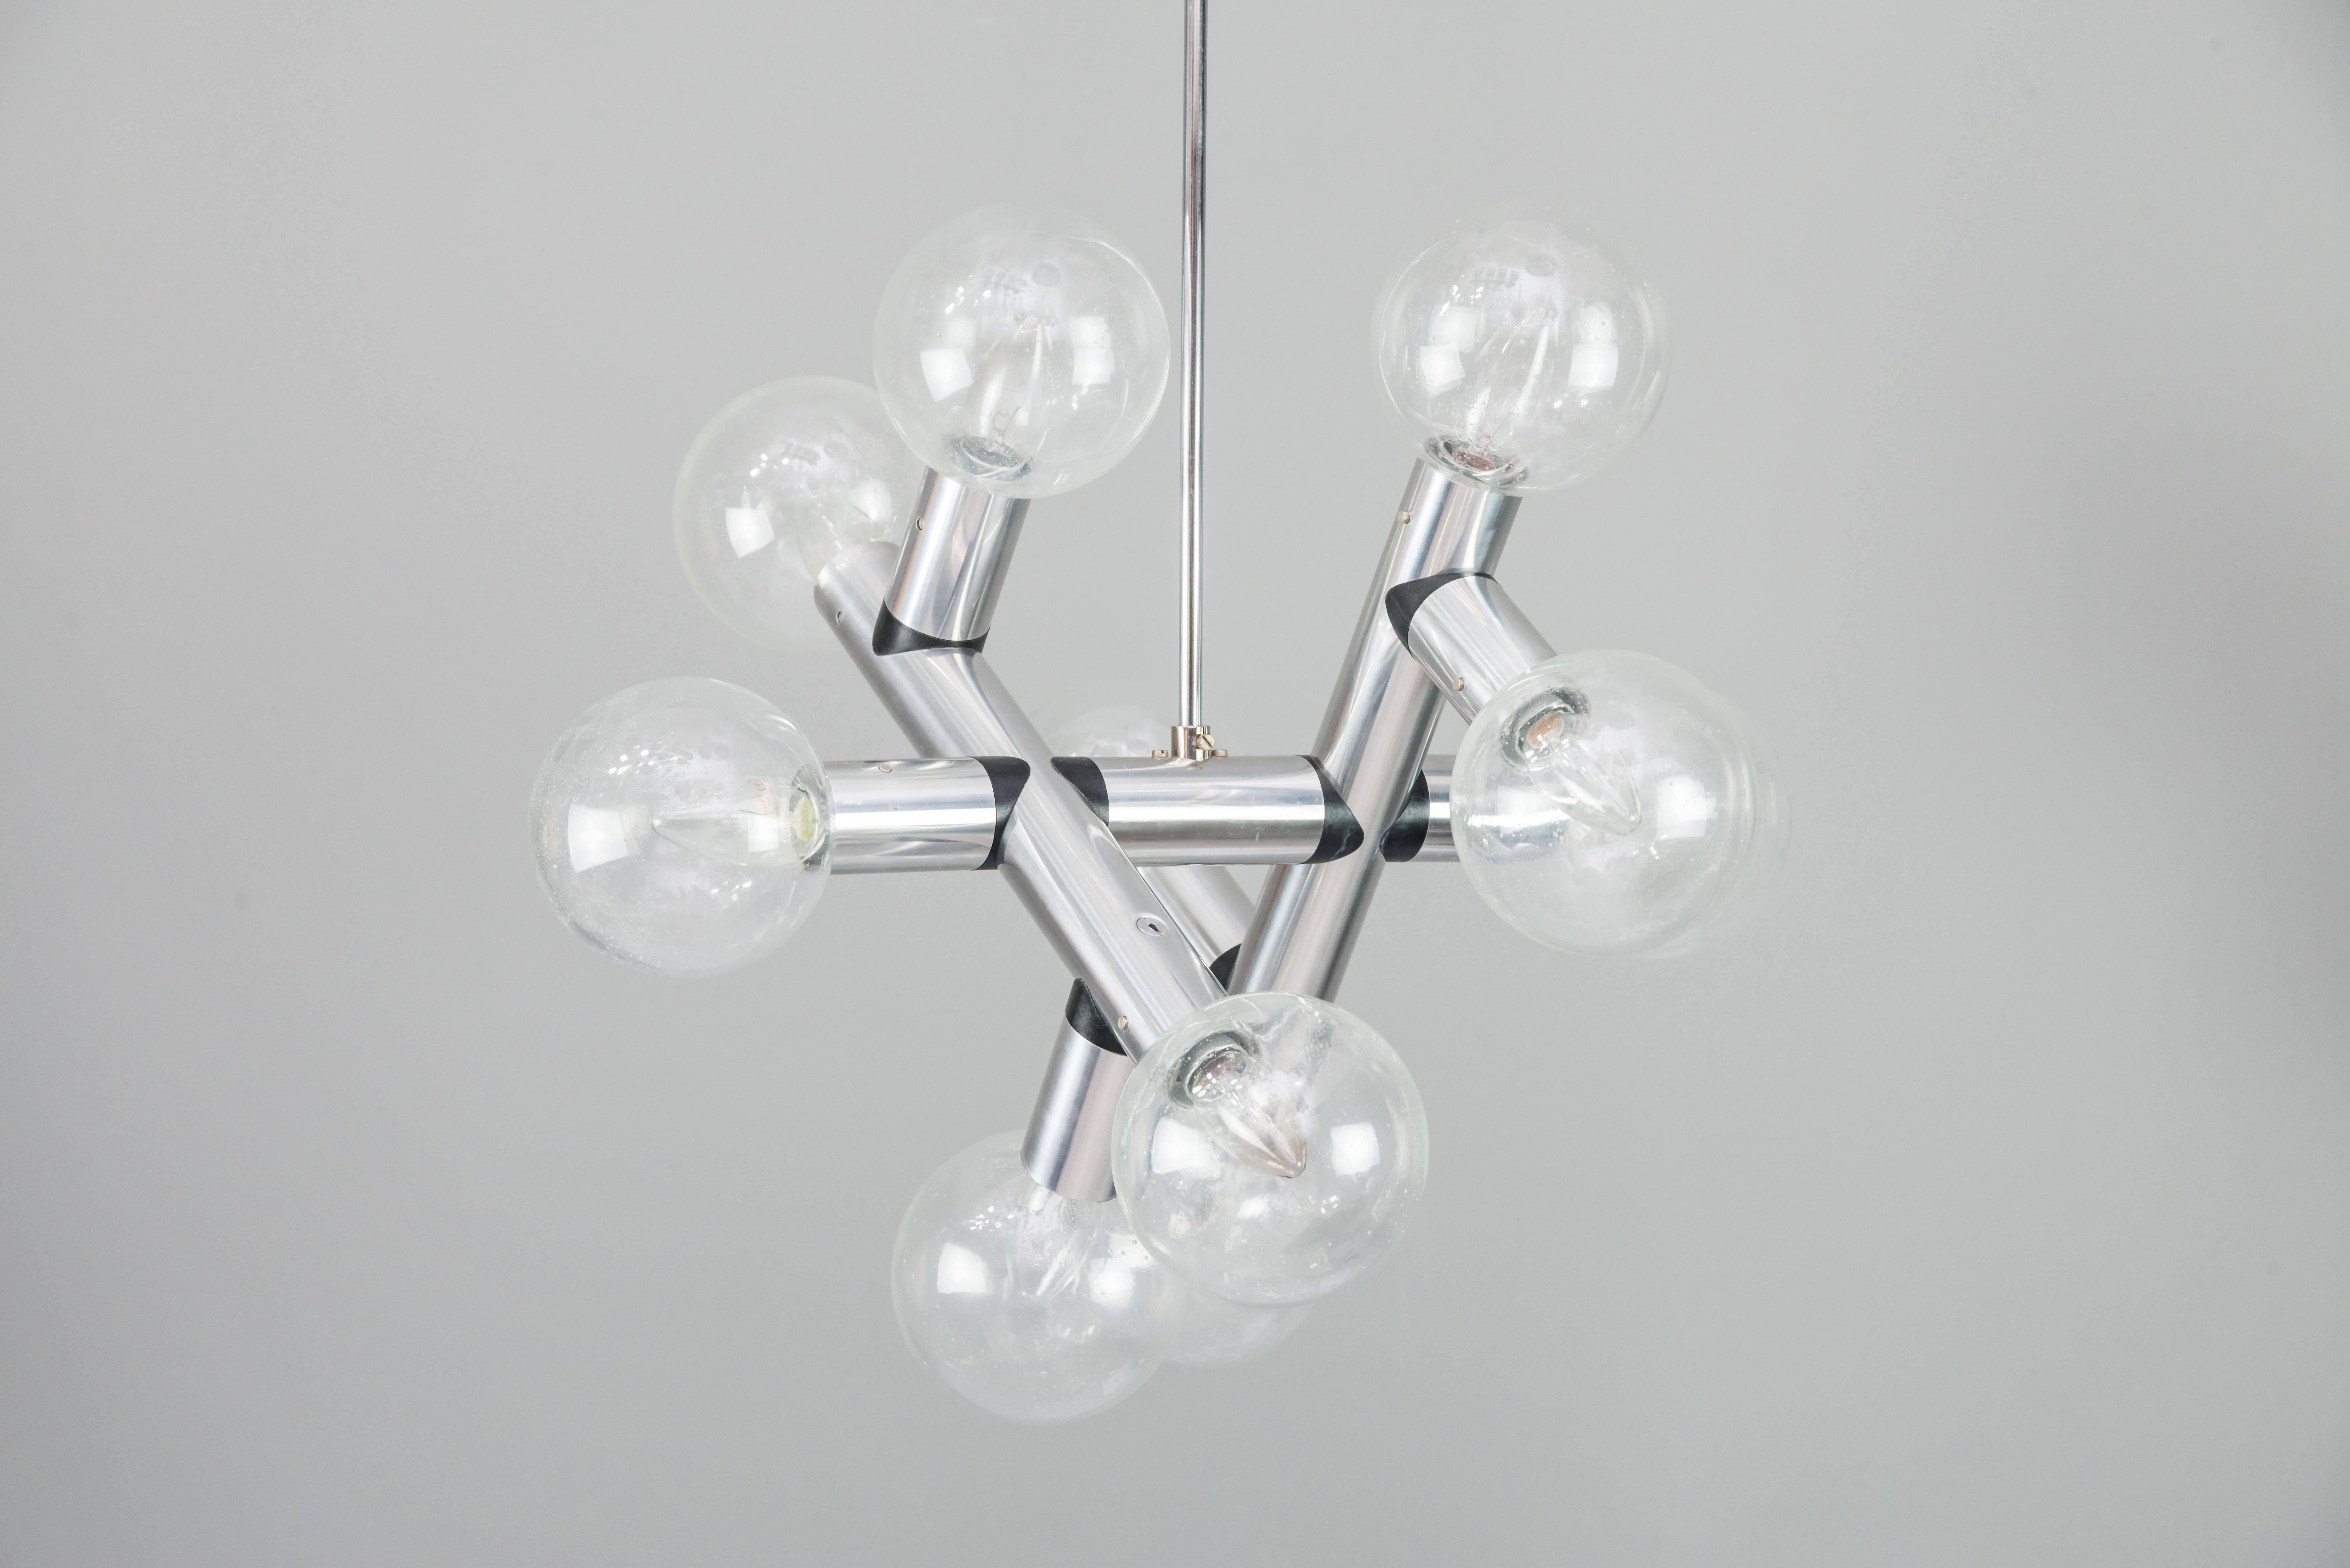 Kalmar Atomic Ceiling Lamps Chandeliers, 1960s In Good Condition For Sale In Wien, AT